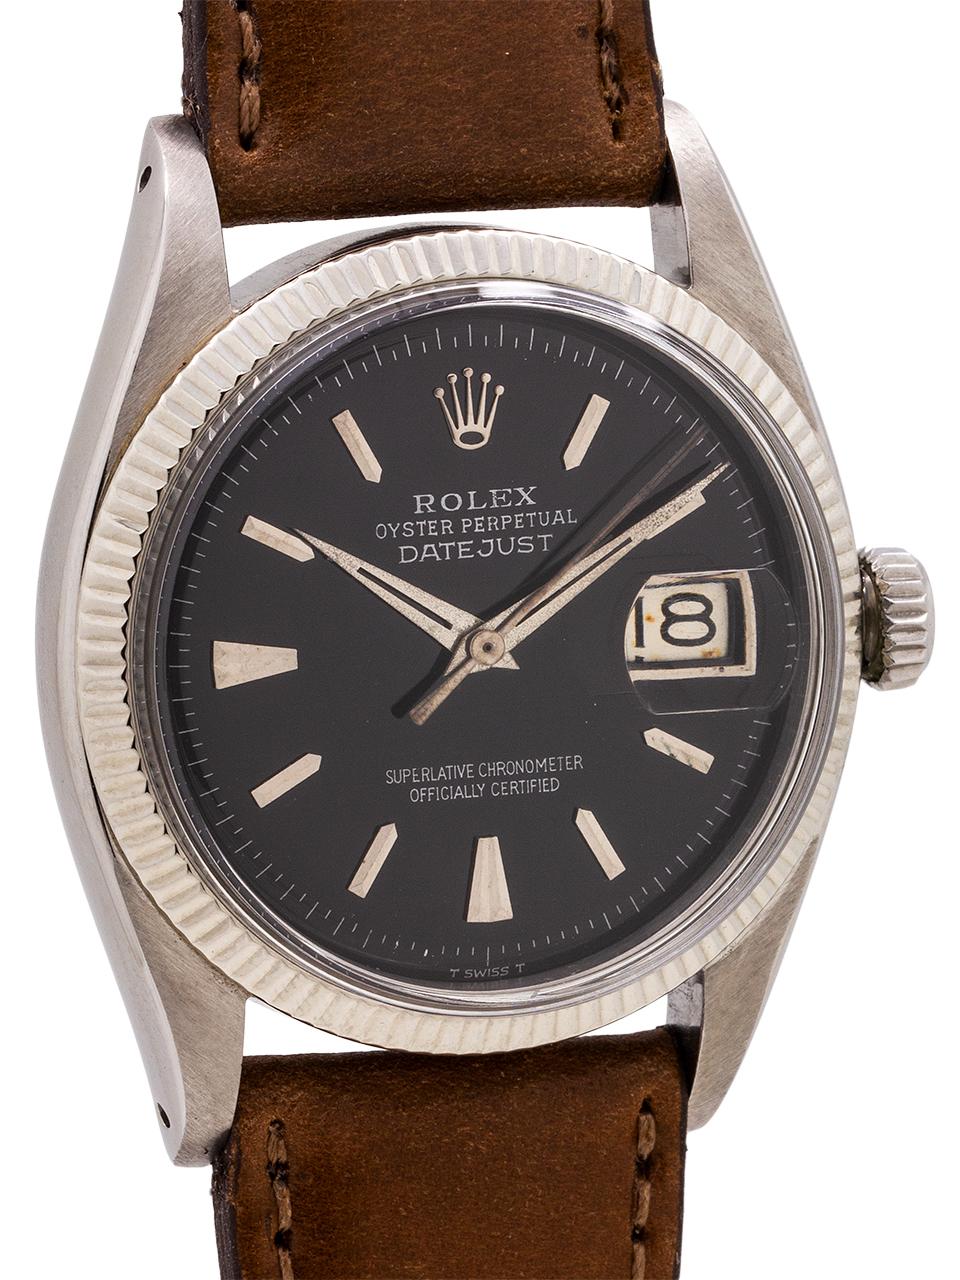 
An early, and exceptional condition Rolex Datejust model ref 6605 serial # 157,xxx circa 1956. Featuring 36mm diameter case with 14K white gold fine milled bezel, and acrylic crystal. Original beautifully restored gloss black dial with elongated